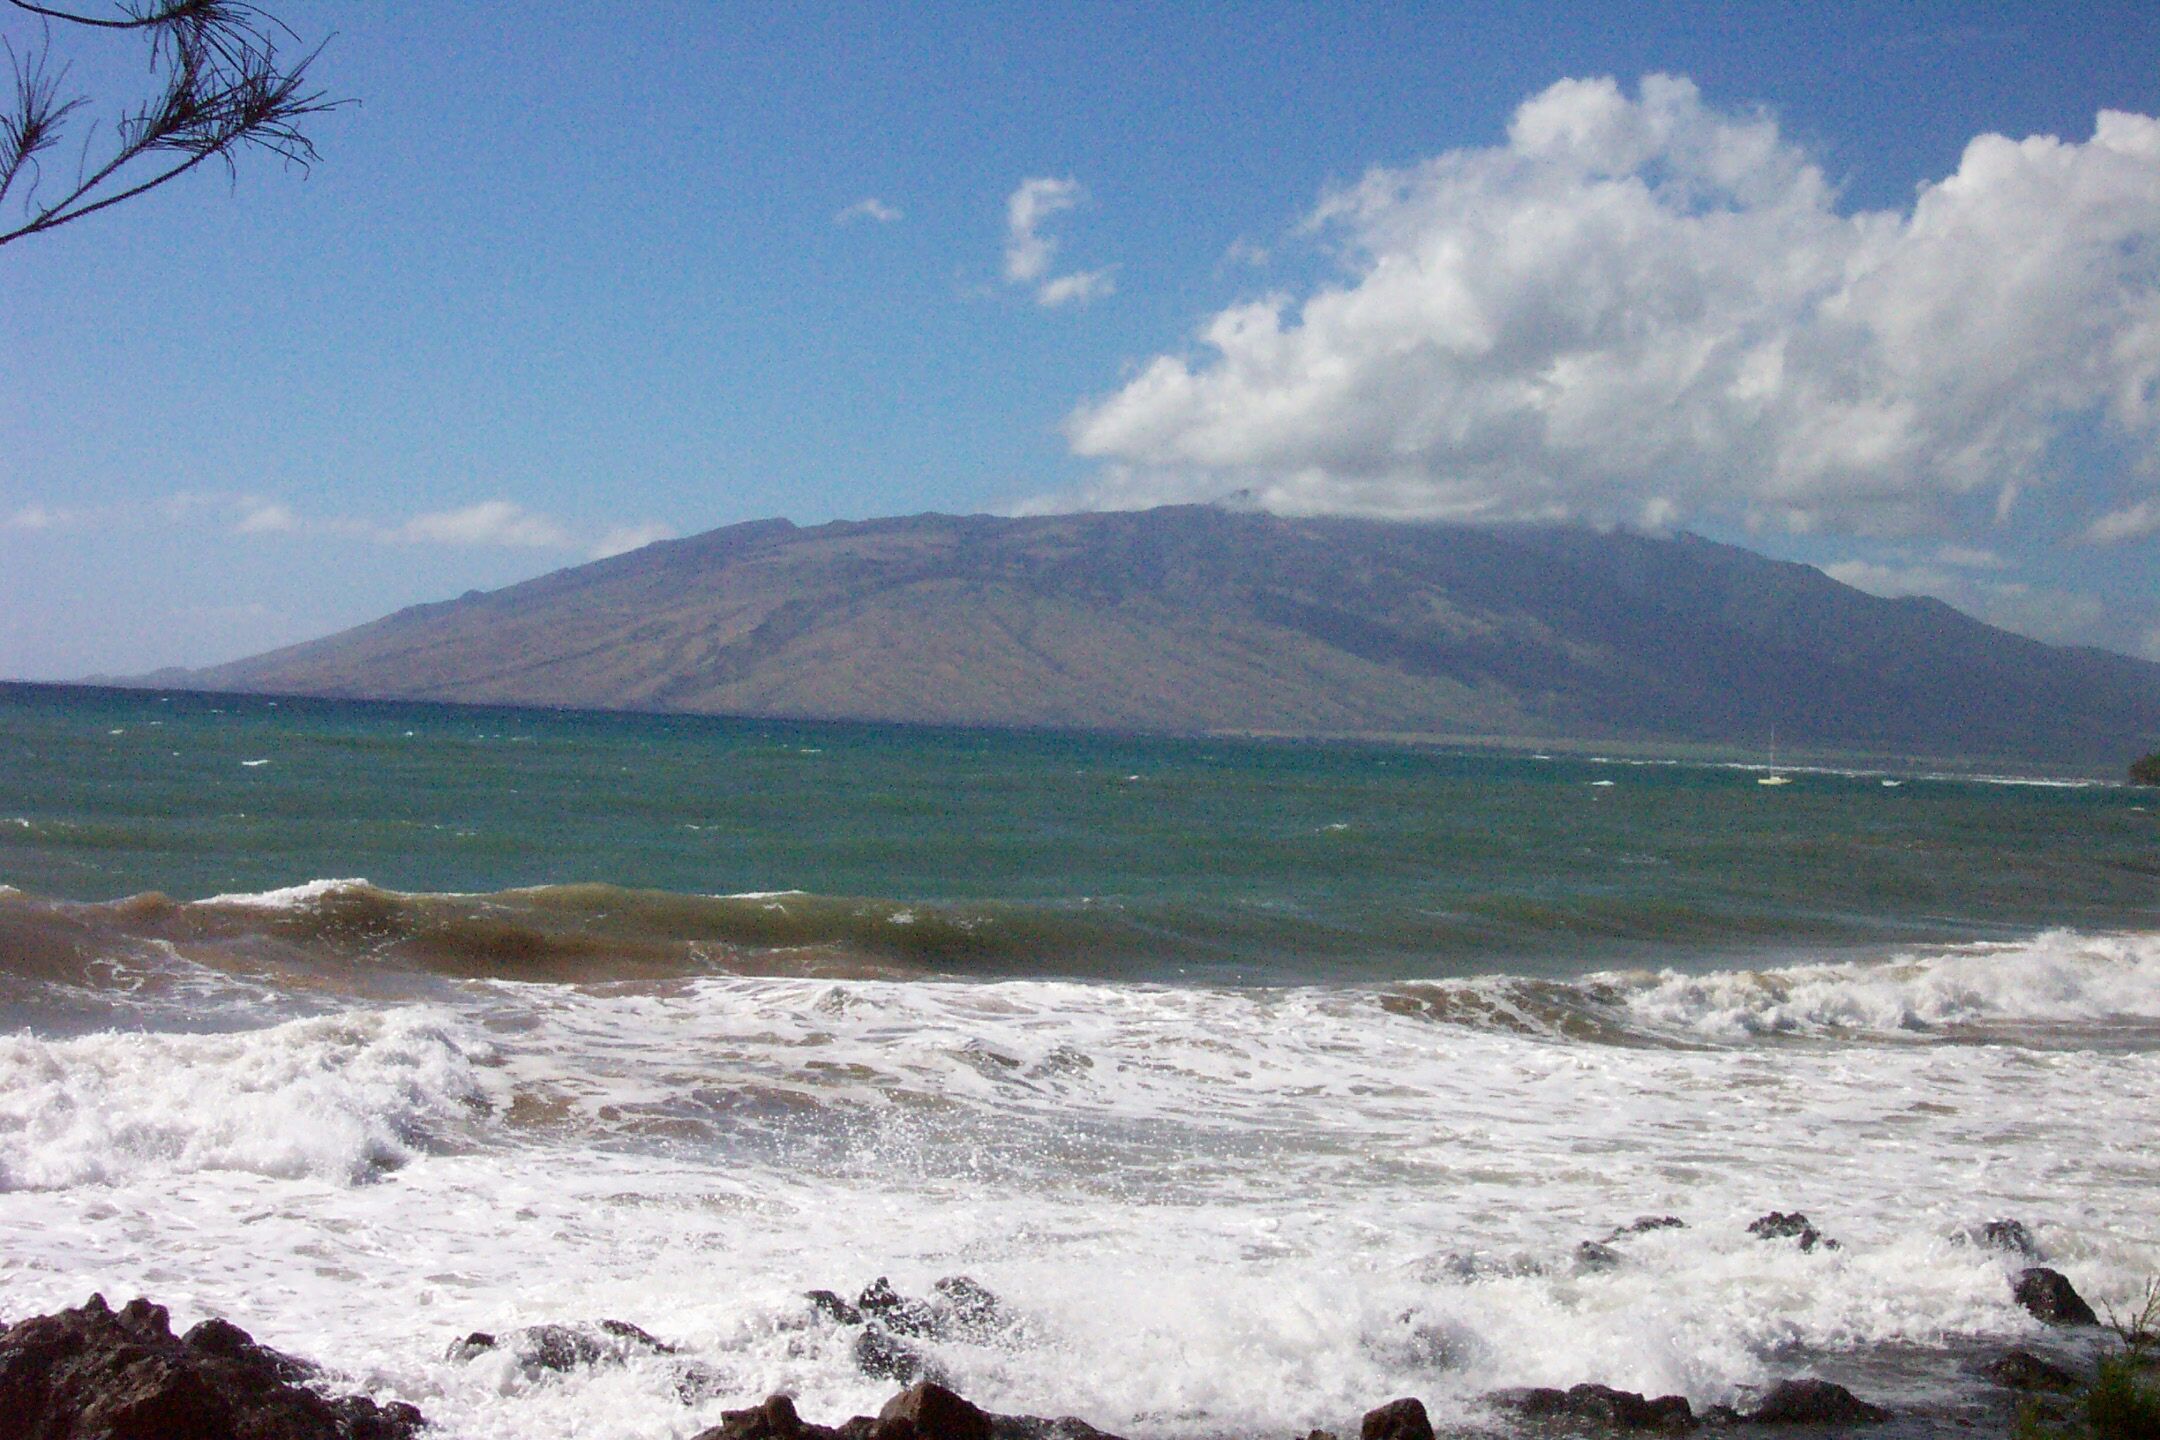 View from Kamaole Beach Park III looking towards the west side of Maui.